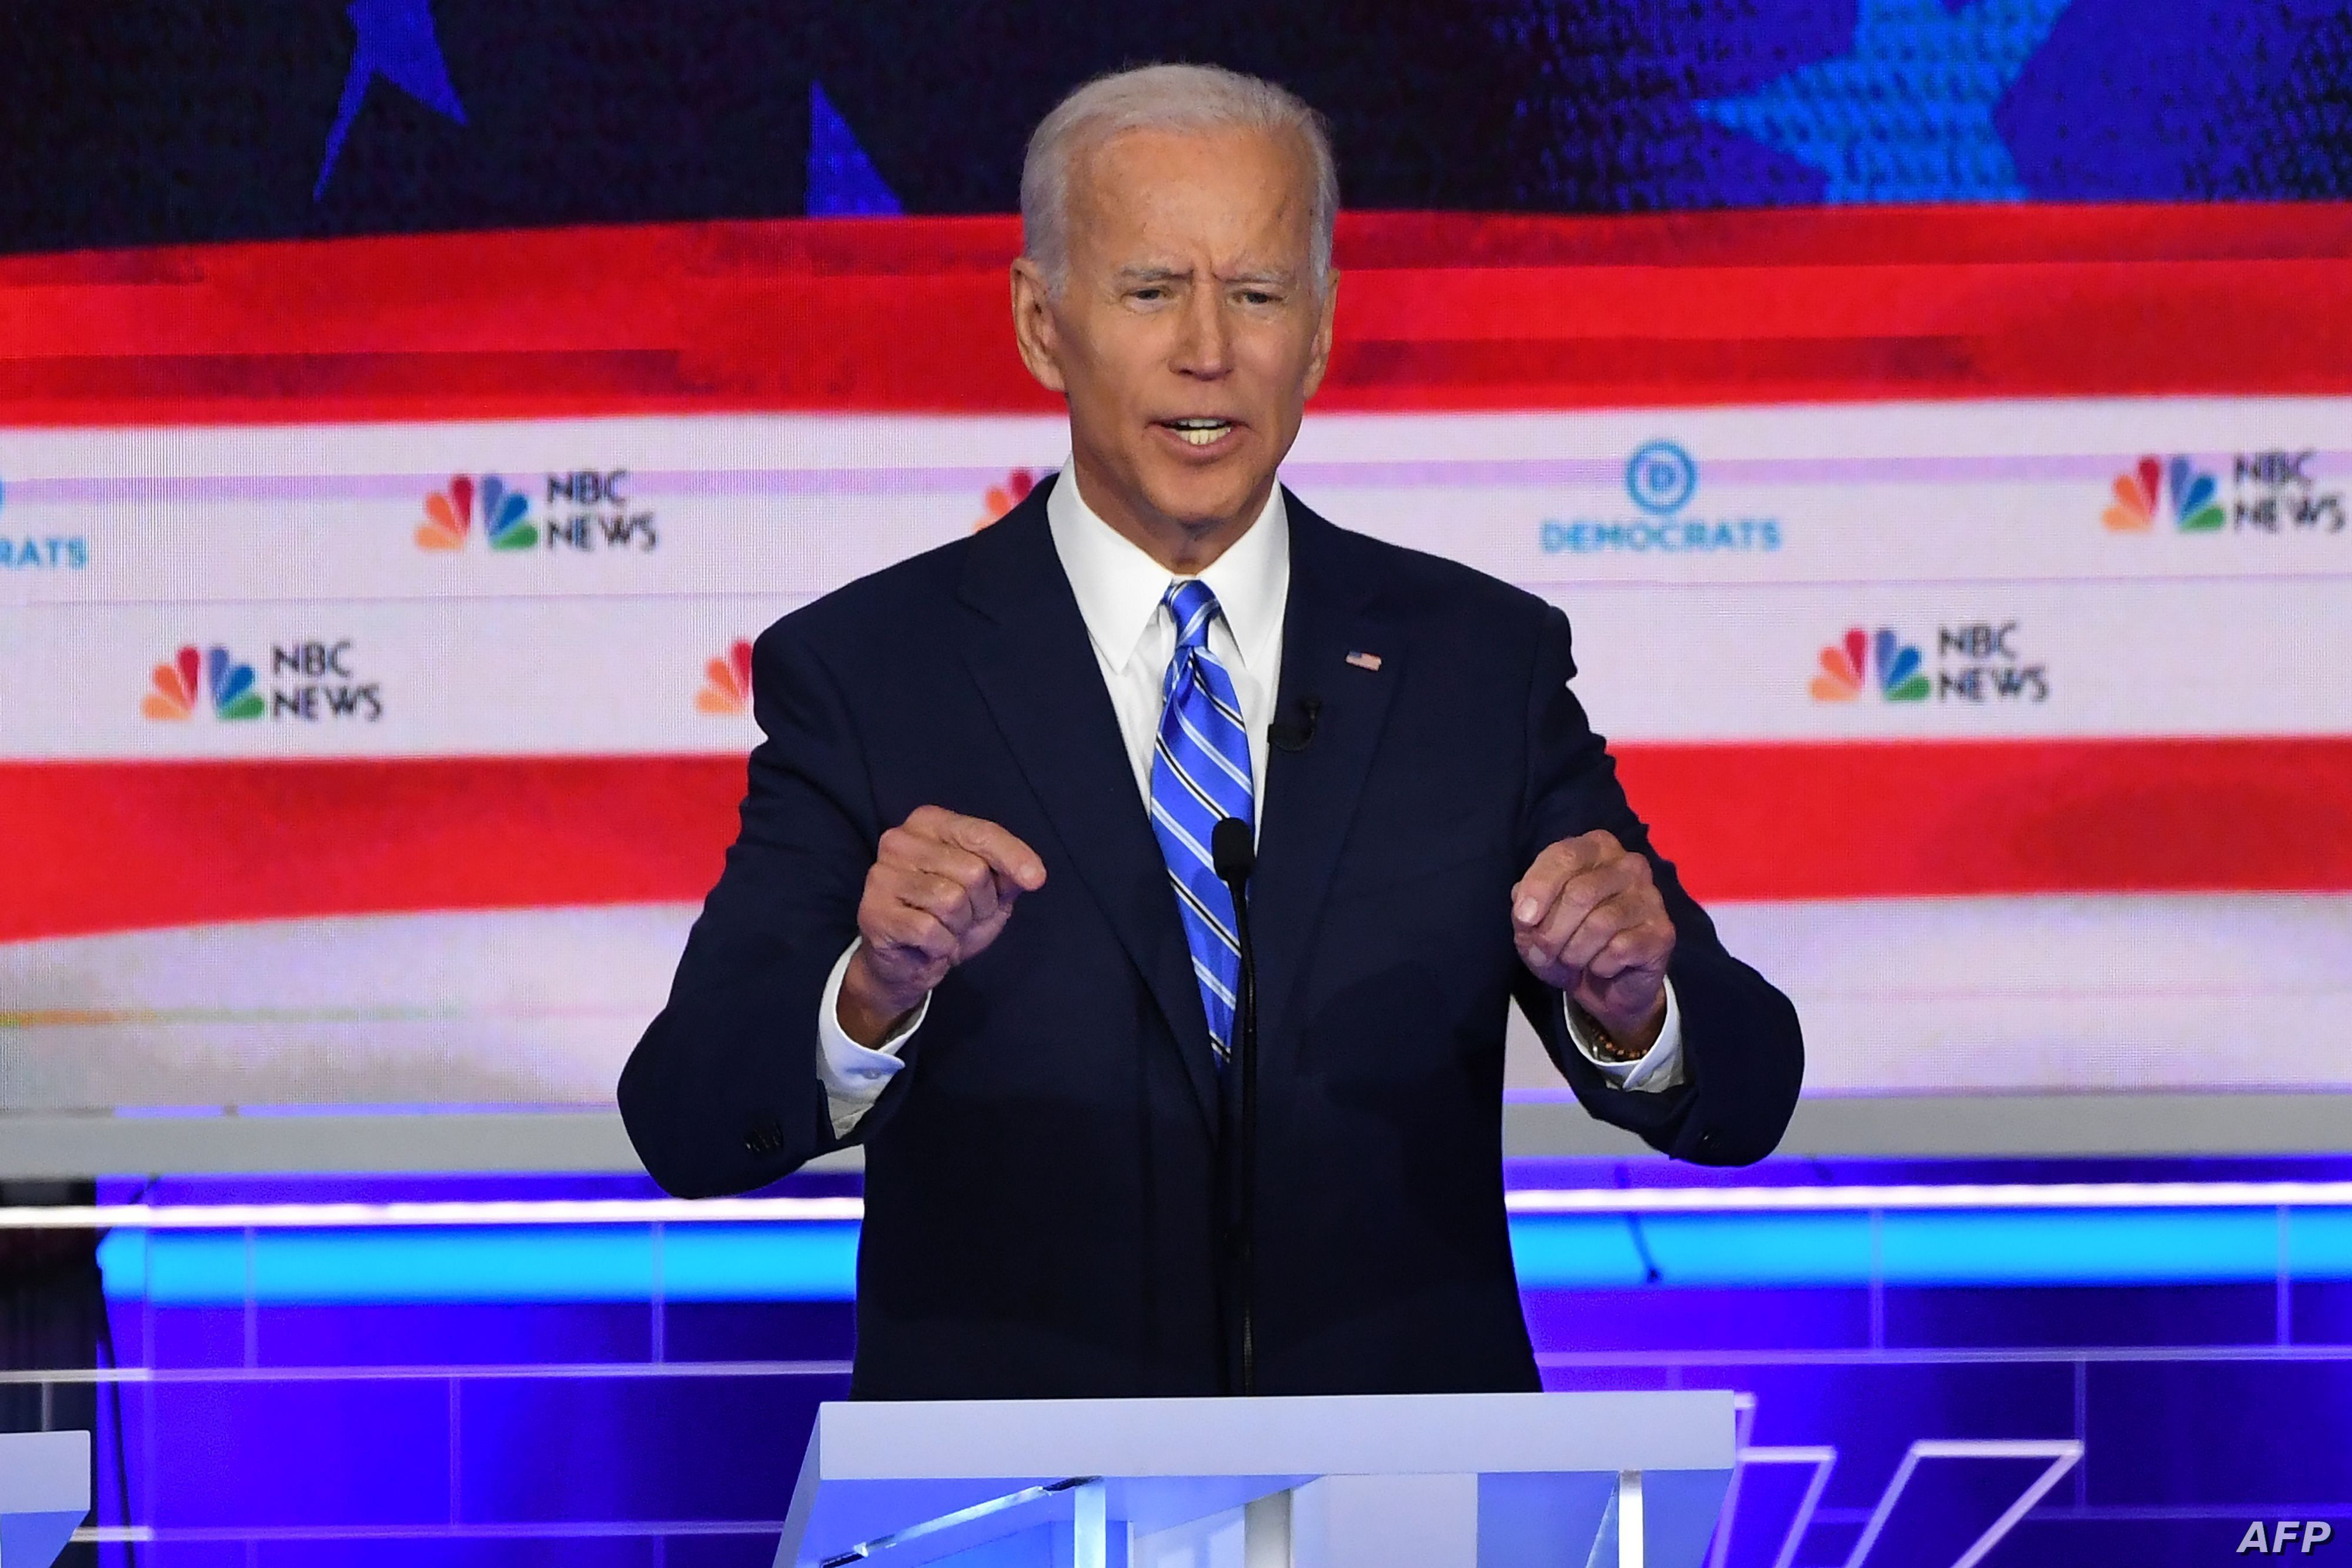 Democratic presidential hopeful former US Vice President Joseph R. Biden Jr. speaks during the second Democratic primary debate of the 2020 presidential campaign season hosted by NBC News at the Adrienne Arsht Center for the Performing Arts in Miami…